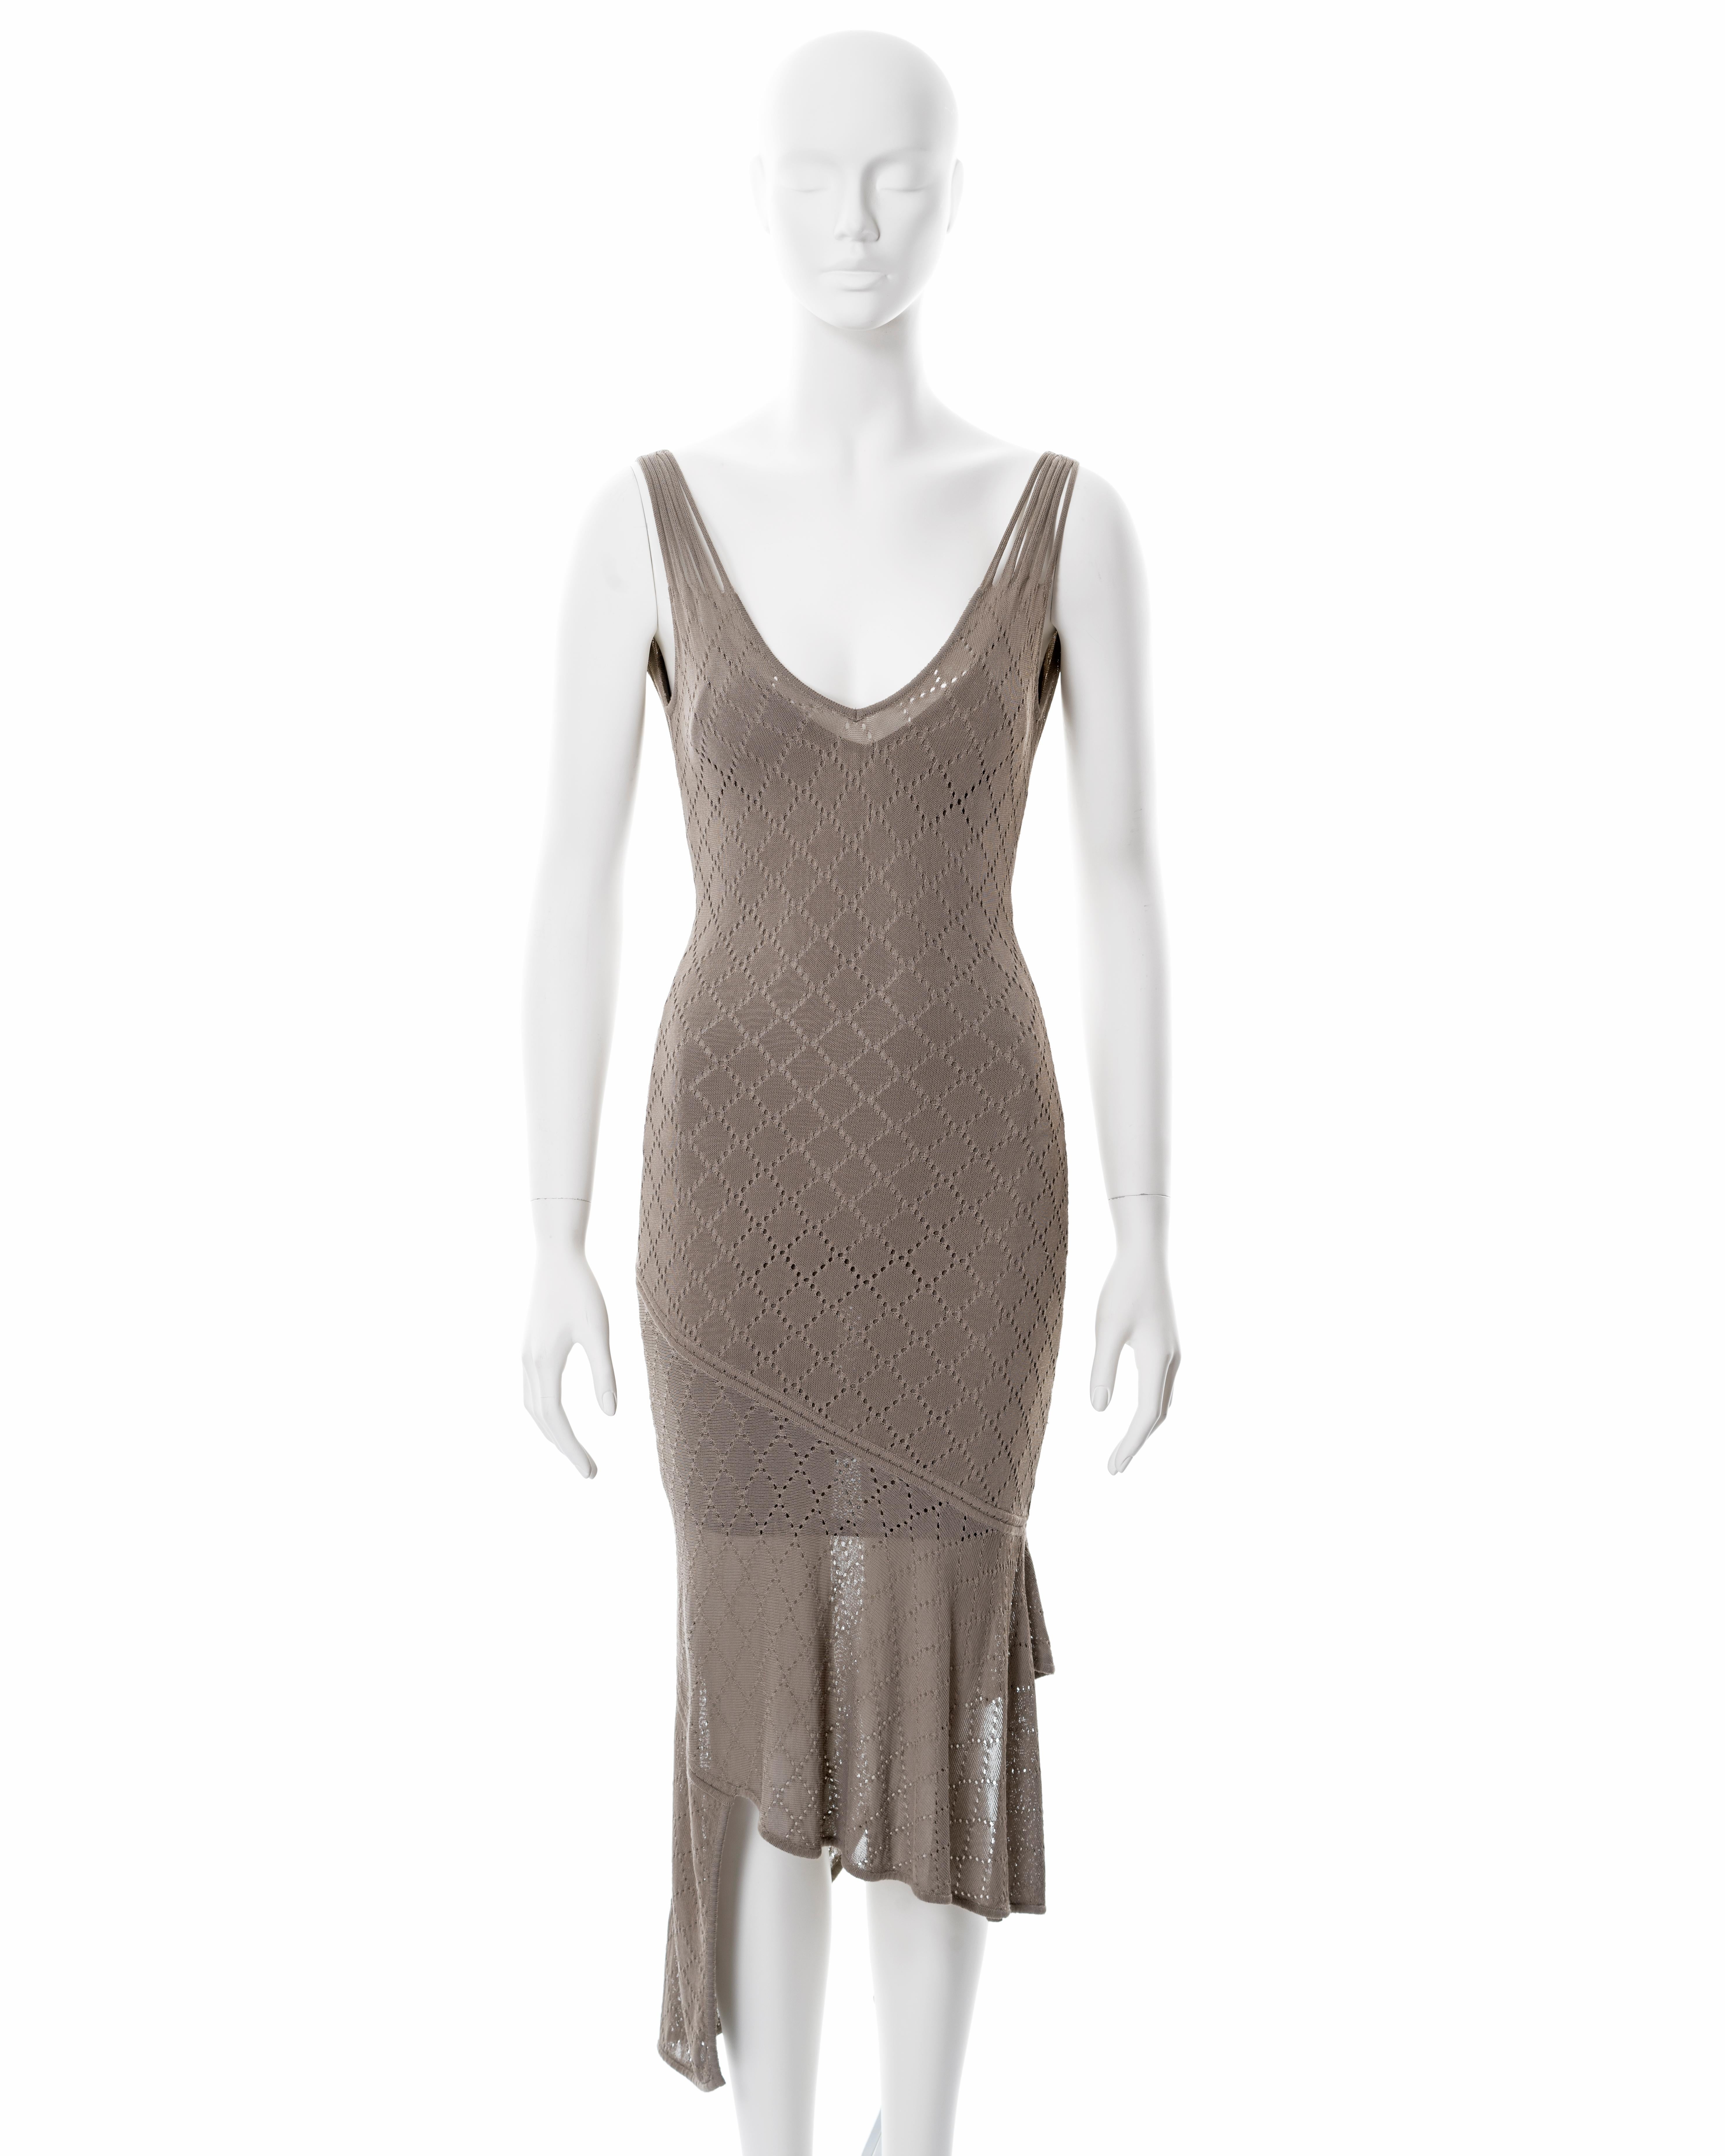 ▪ Christian Dior taupe open-knit dress
▪ Designed by John Galliano
▪ Sold by One of a Kind Archive
▪ Spring-Summer 2001
▪ Double-layered 
▪ Multiple shoulder straps 
▪ Figure-hugging fit 
▪ Deep v neckline 
▪ Asymmetric hemline 
▪ Size Small

All